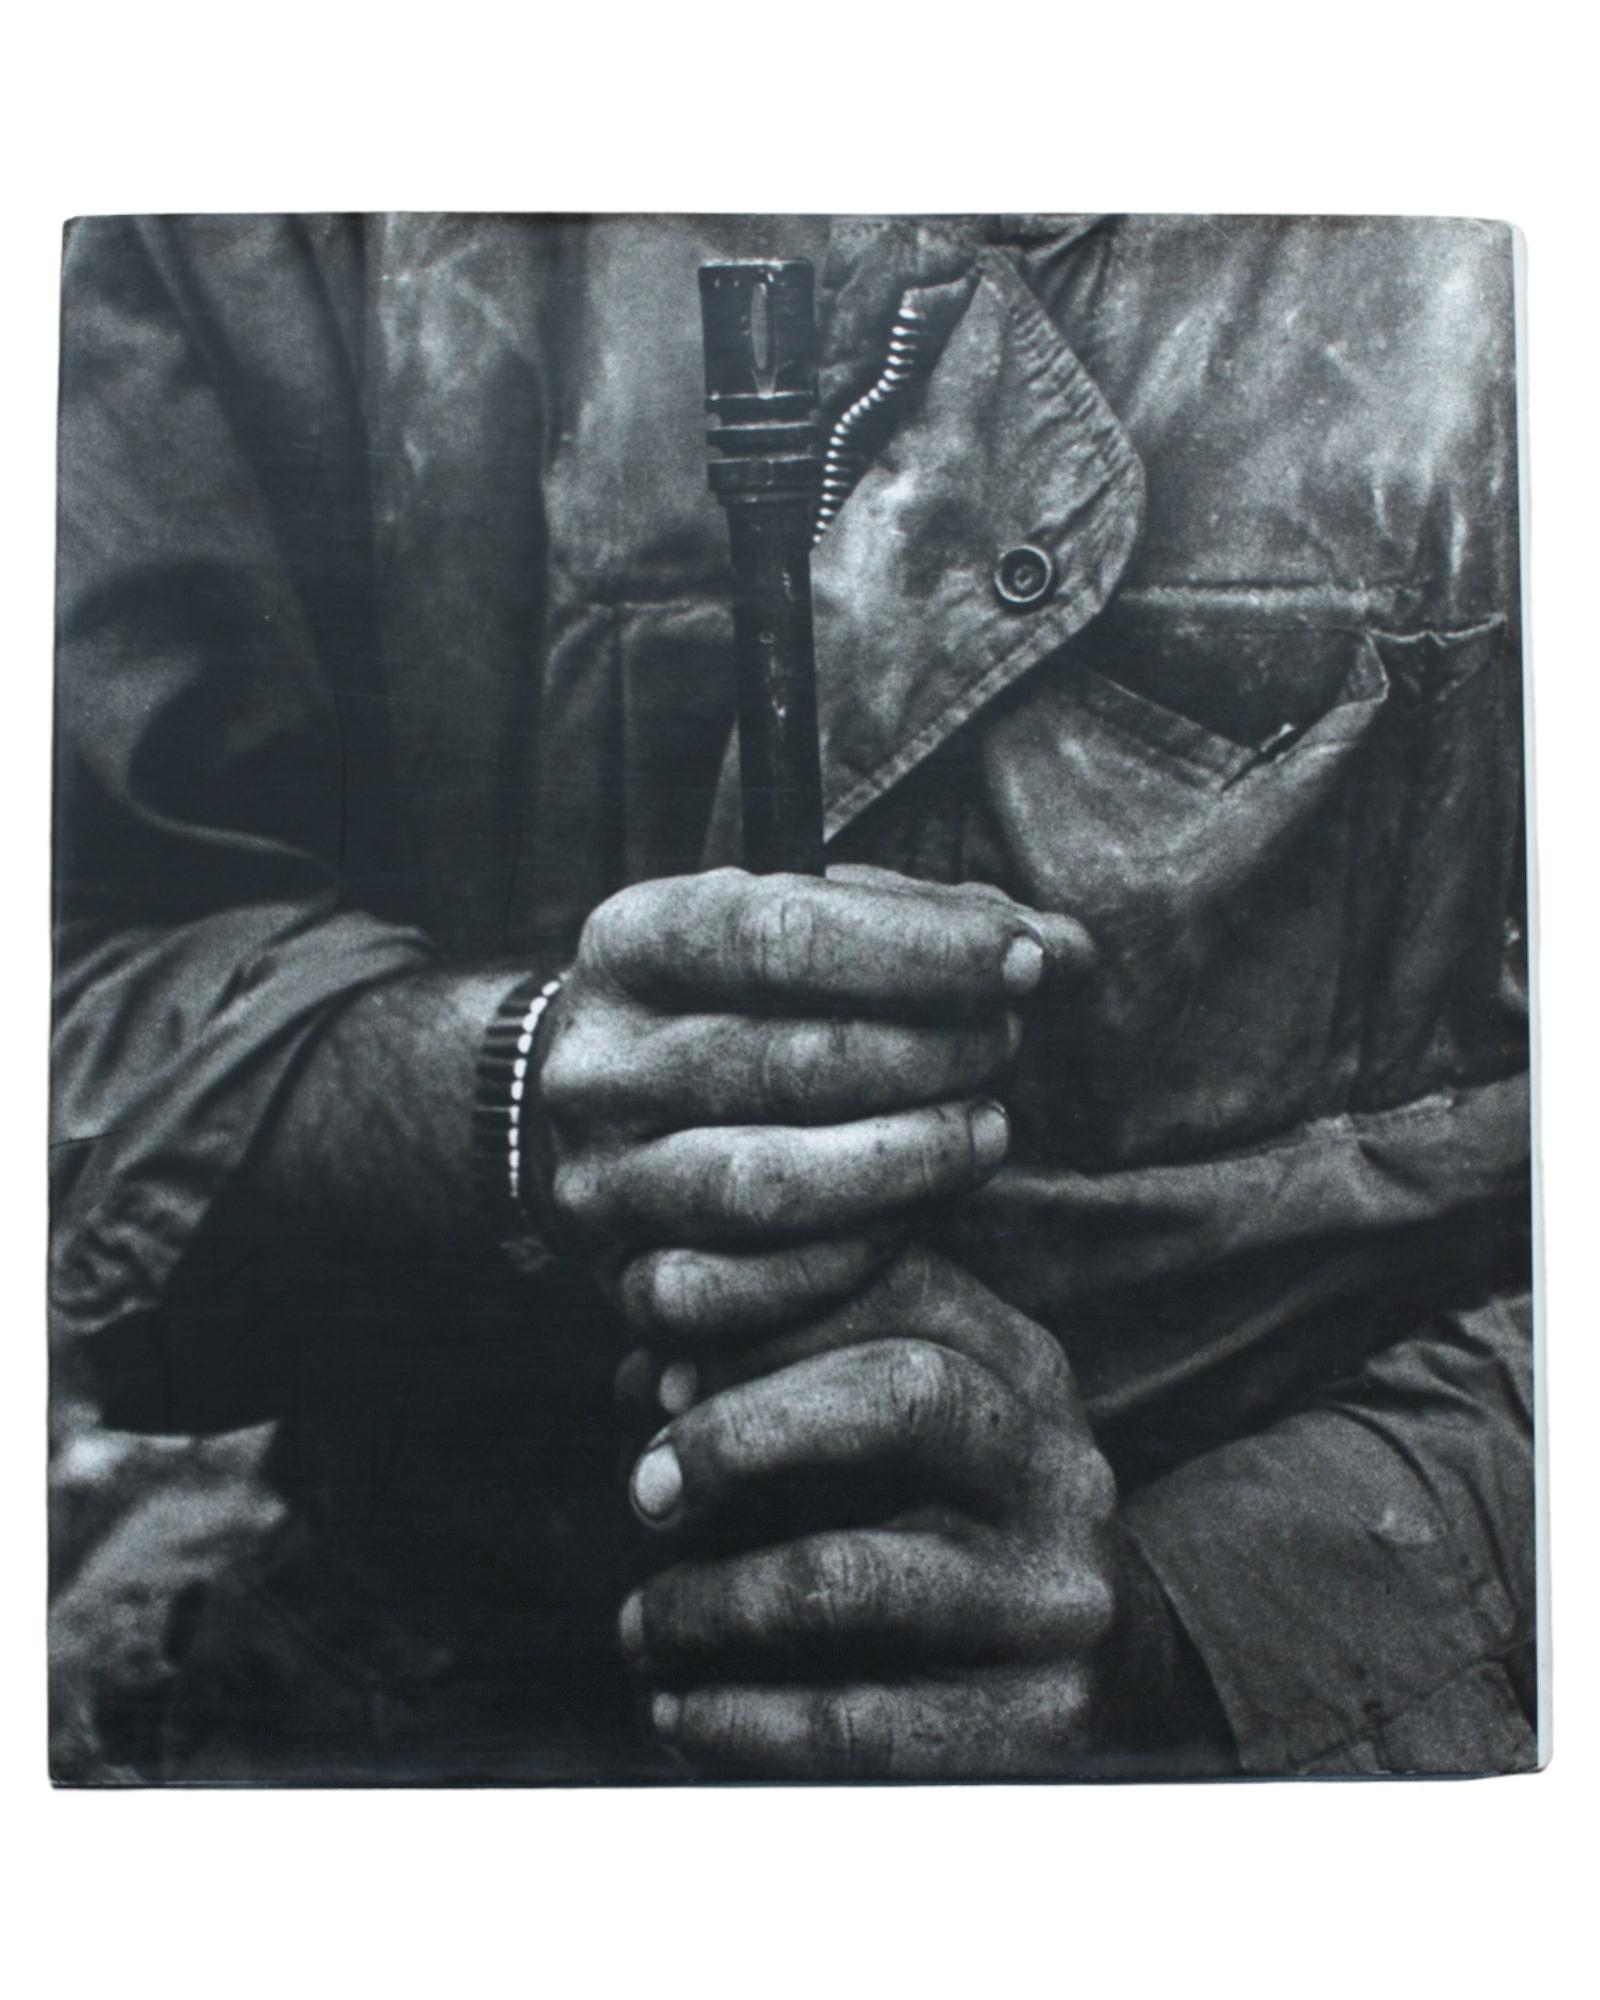 Don McCullin

Published by Jonathan Cape, London, 2001

First edition

Hardcover with dust cover.

Don McCullin's iconic images come to life, capturing the raw essence of human emotions and the stark realities of life's diverse landscapes. Each